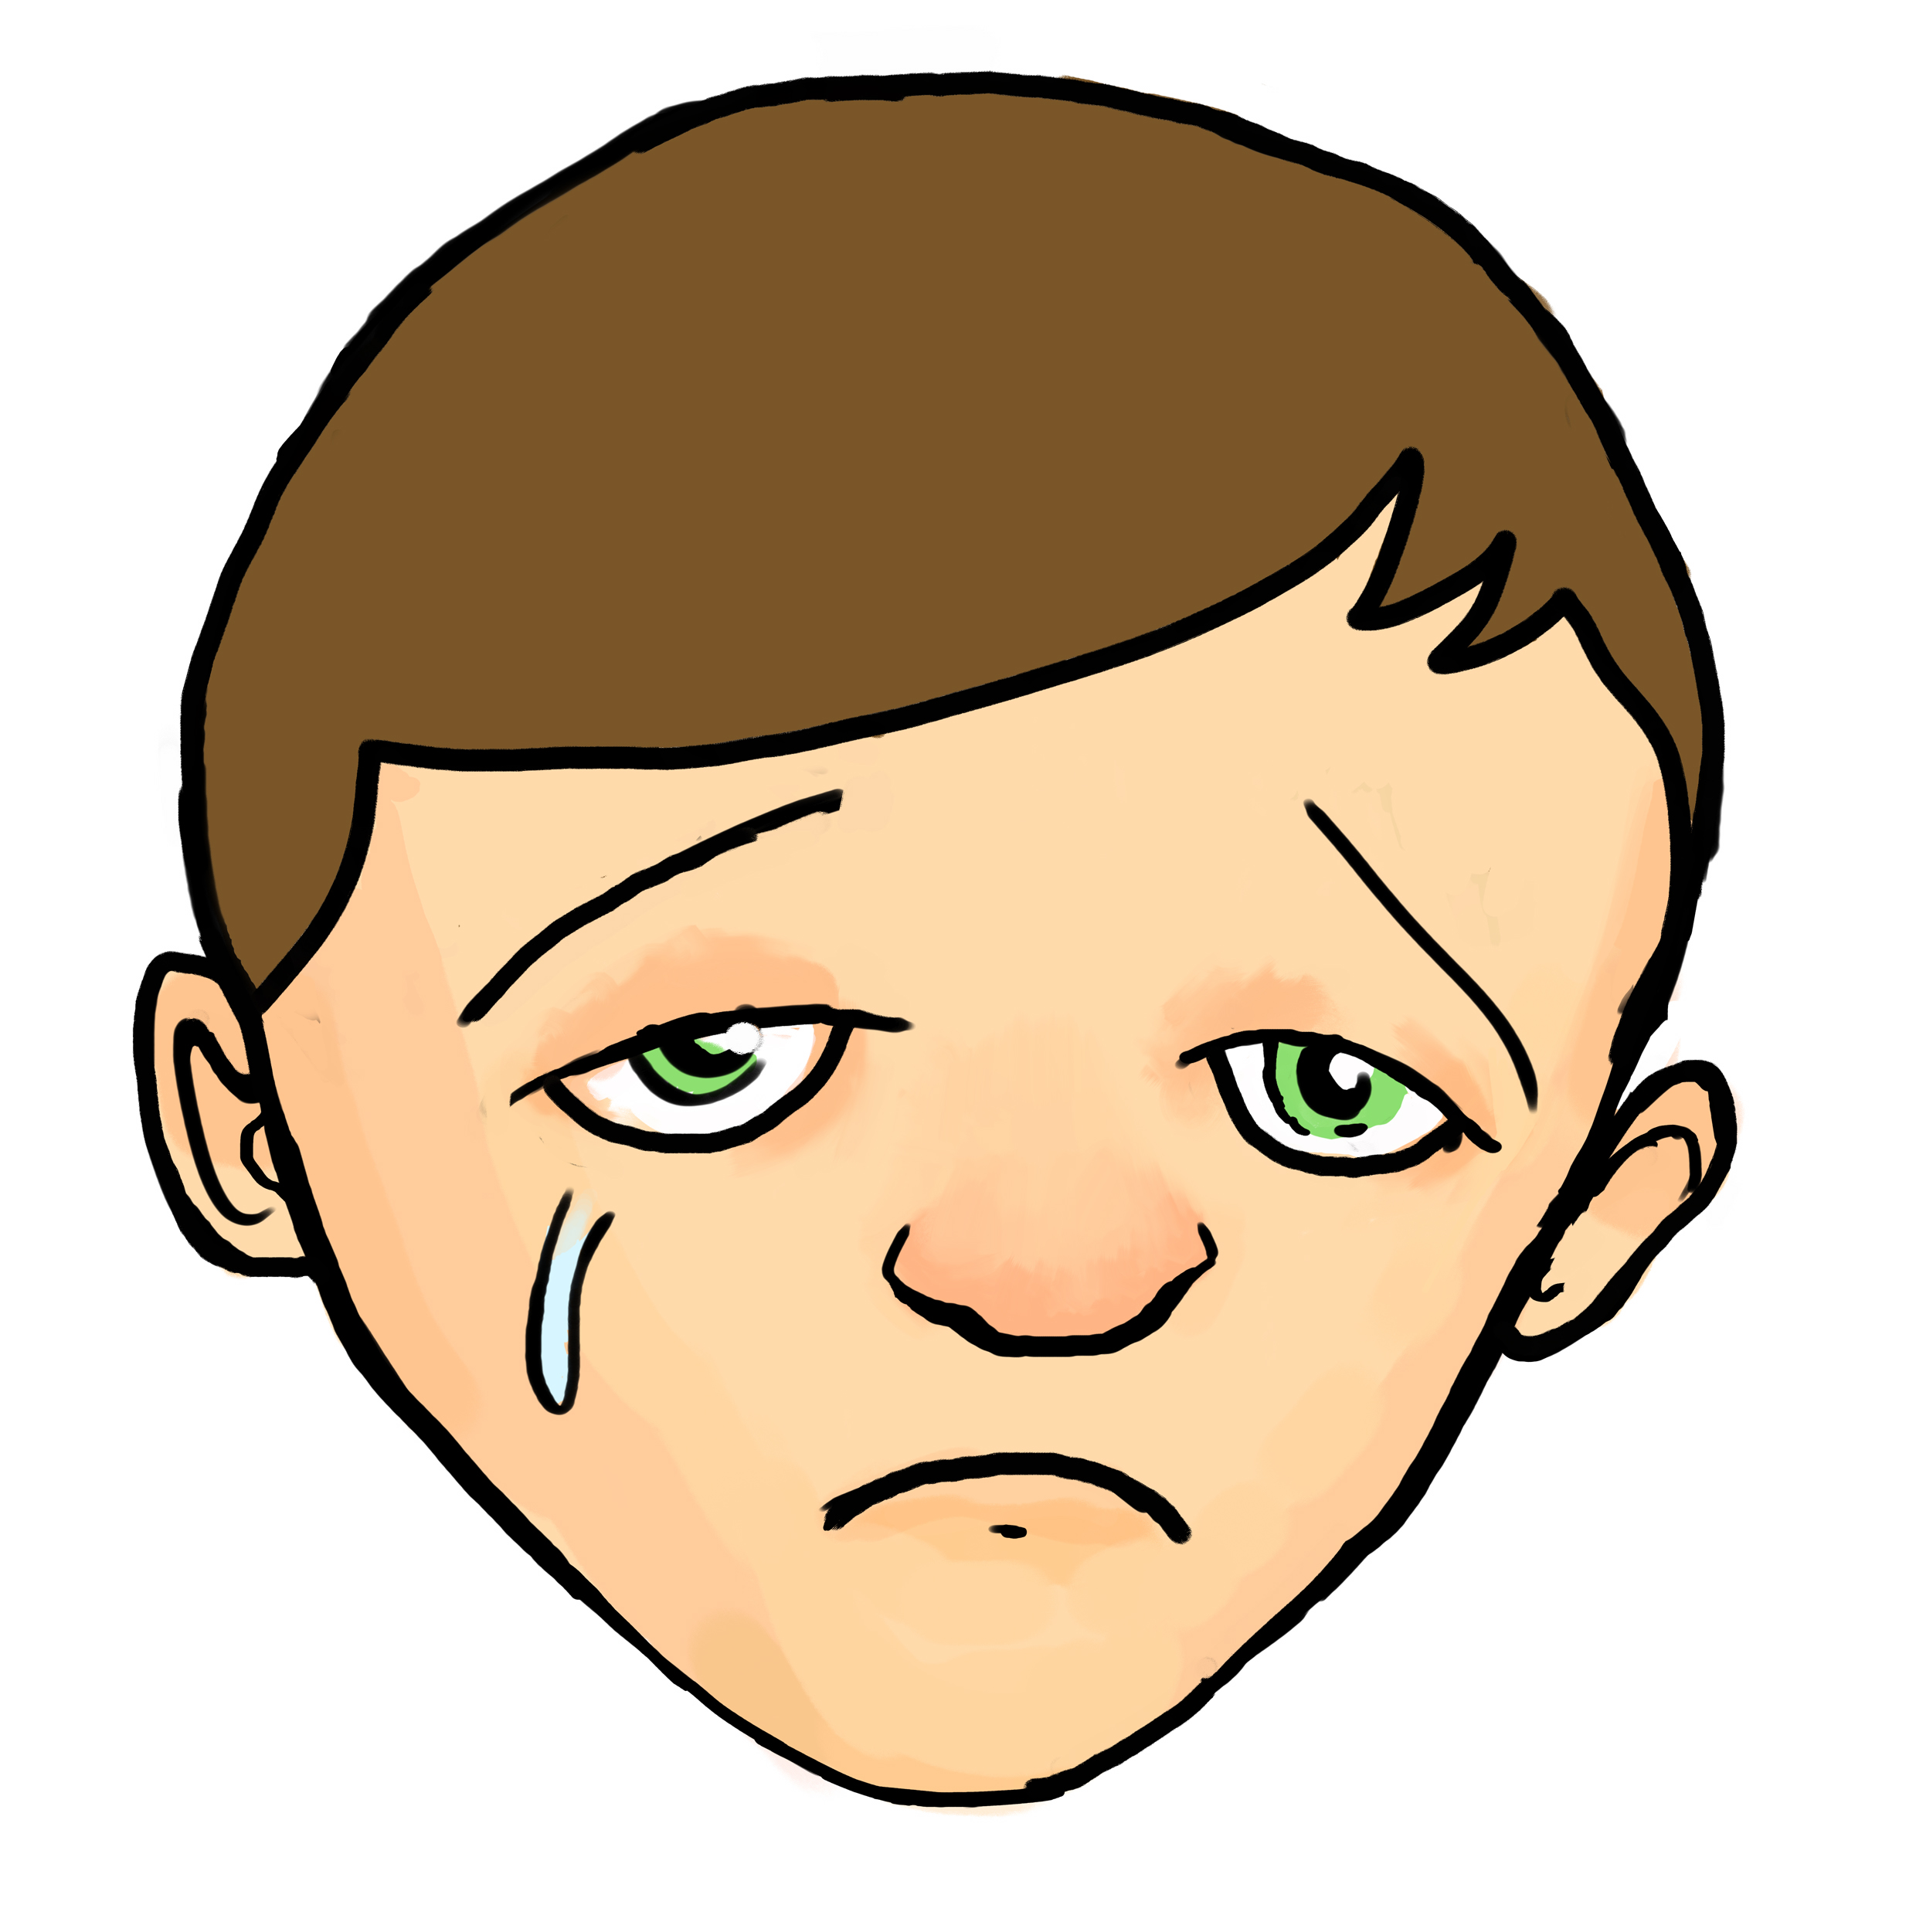 22 Emotions Faces Sad Free Cliparts That You Can Download To You    